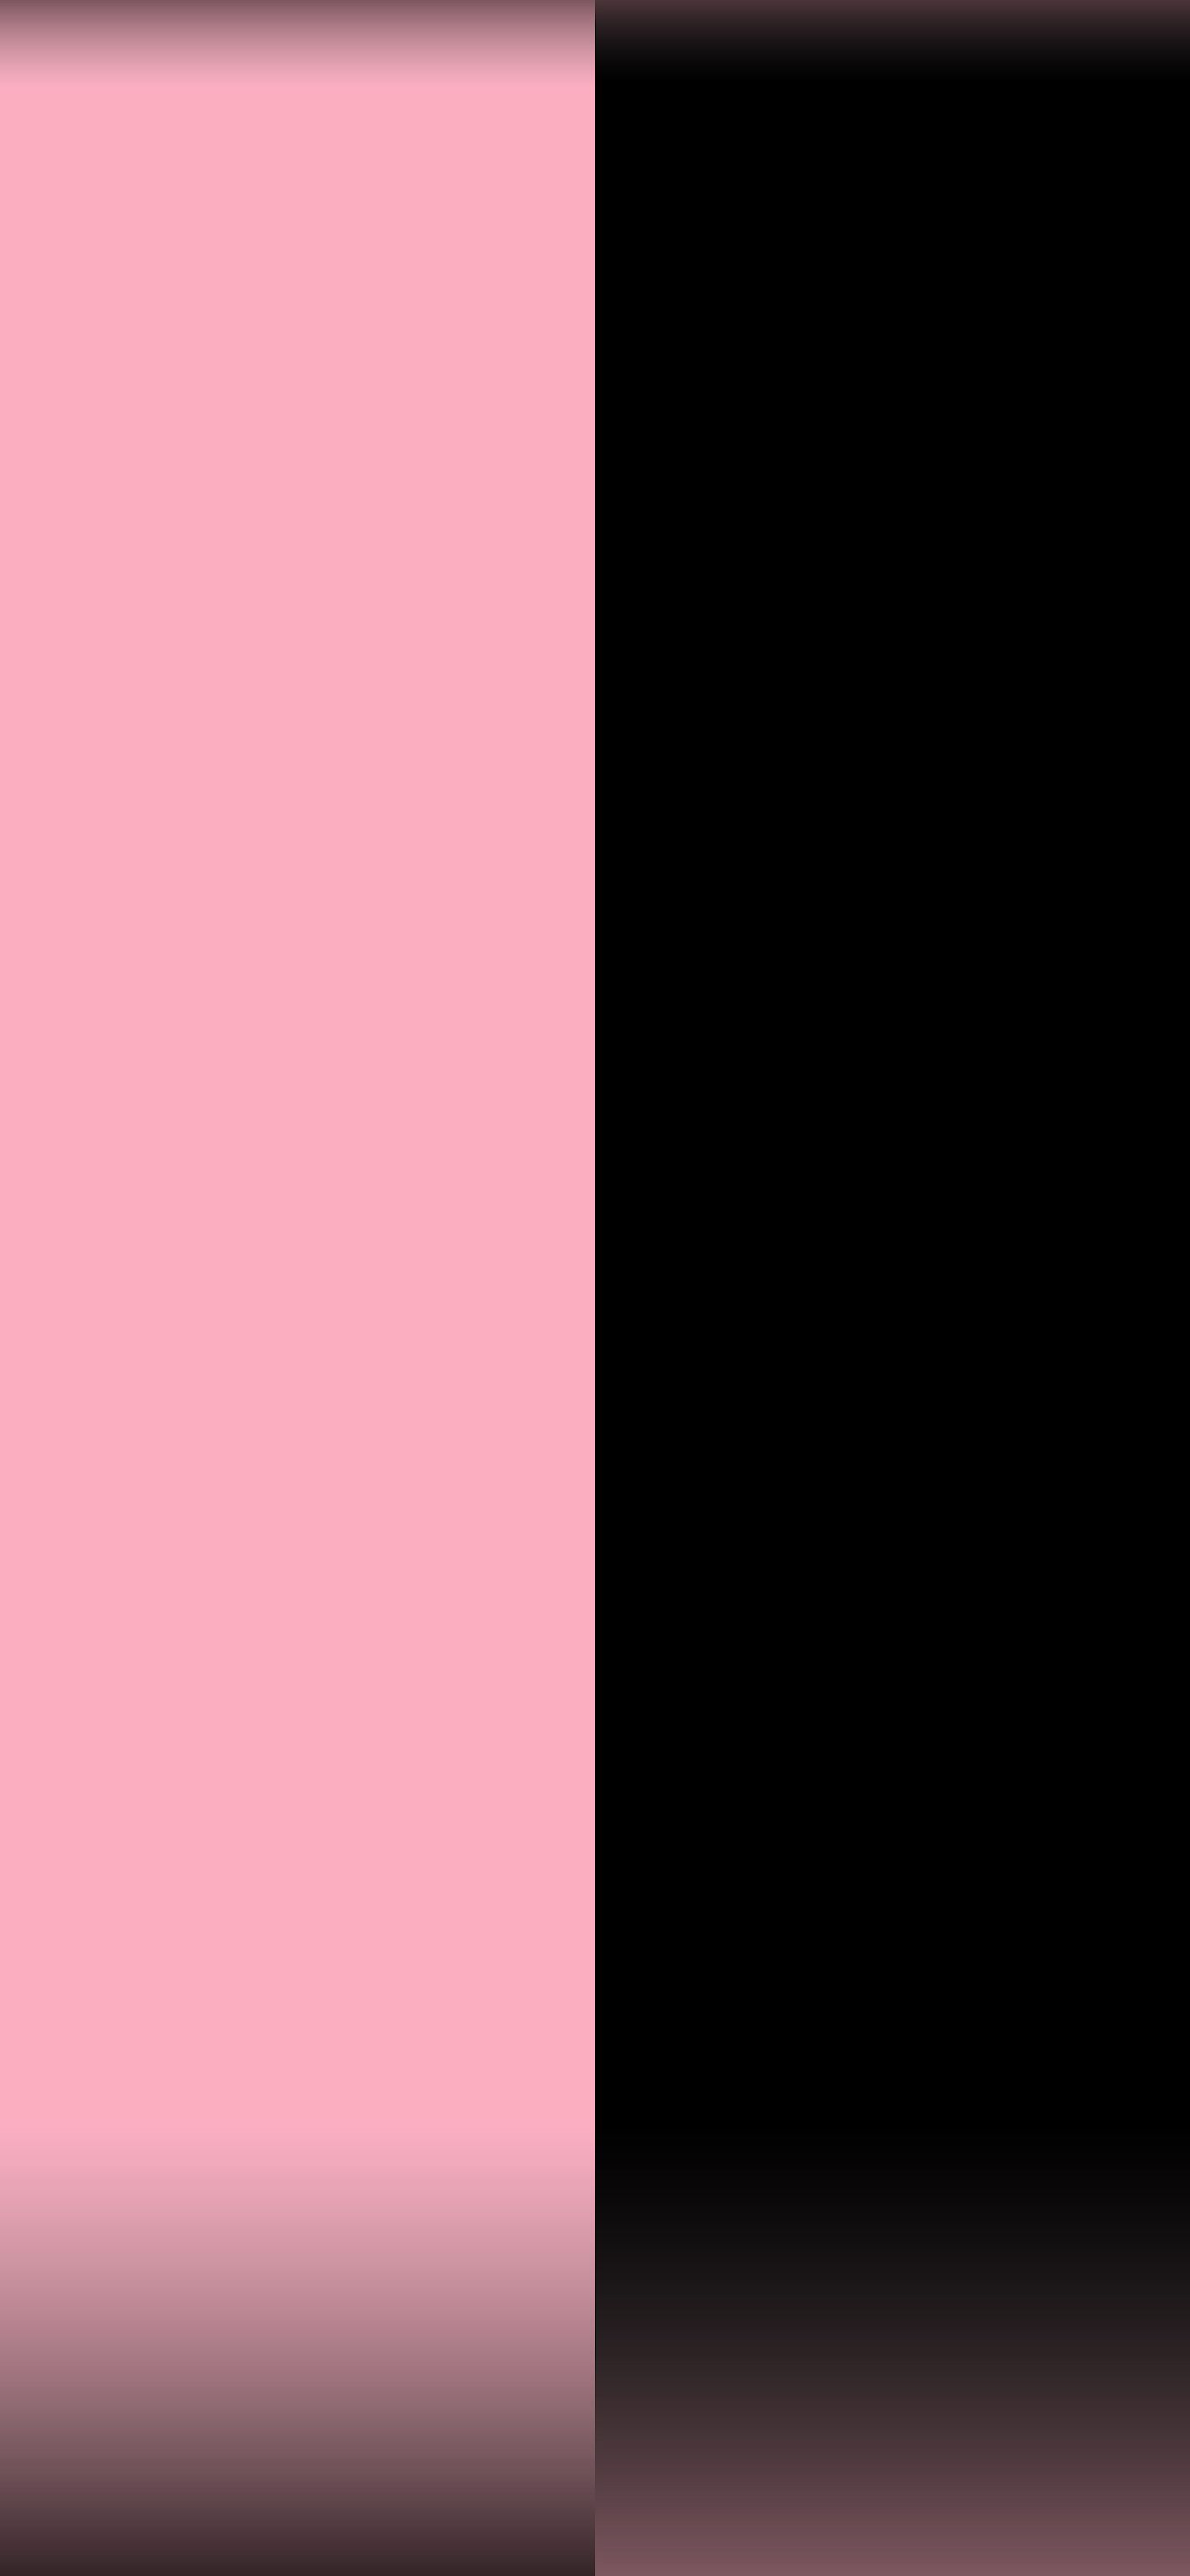 Black and Pink. DUAL. Color wallpaper iphone, iPhone homescreen wallpaper, Pink wallpaper iphone